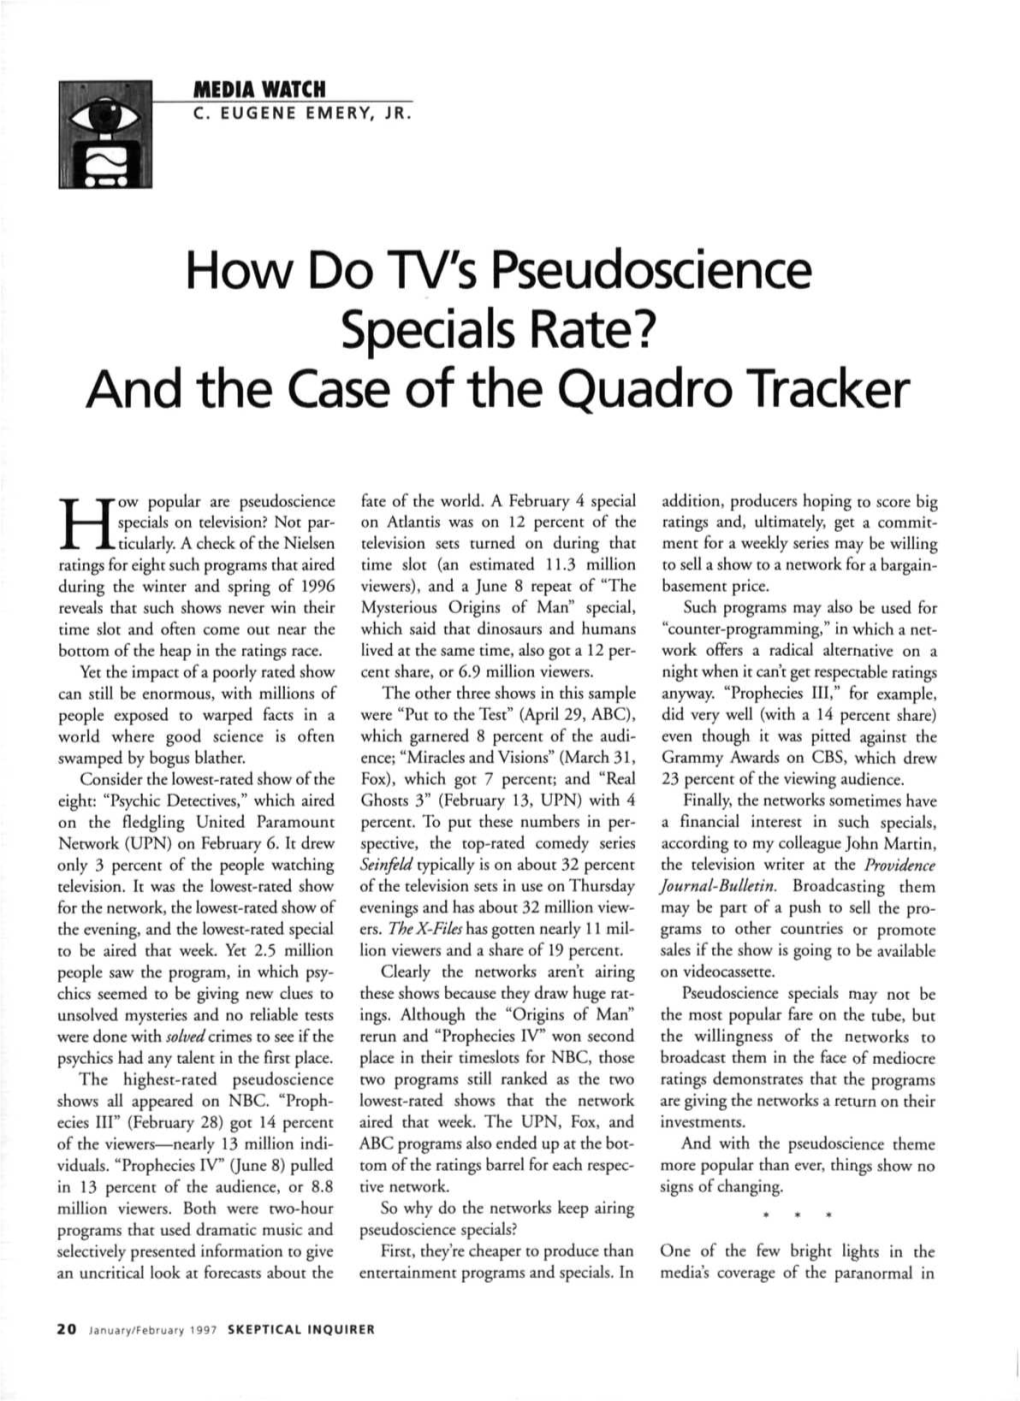 How Do TV's Pseudoscience Specials Rate? and the Case of the Quadro Tracker